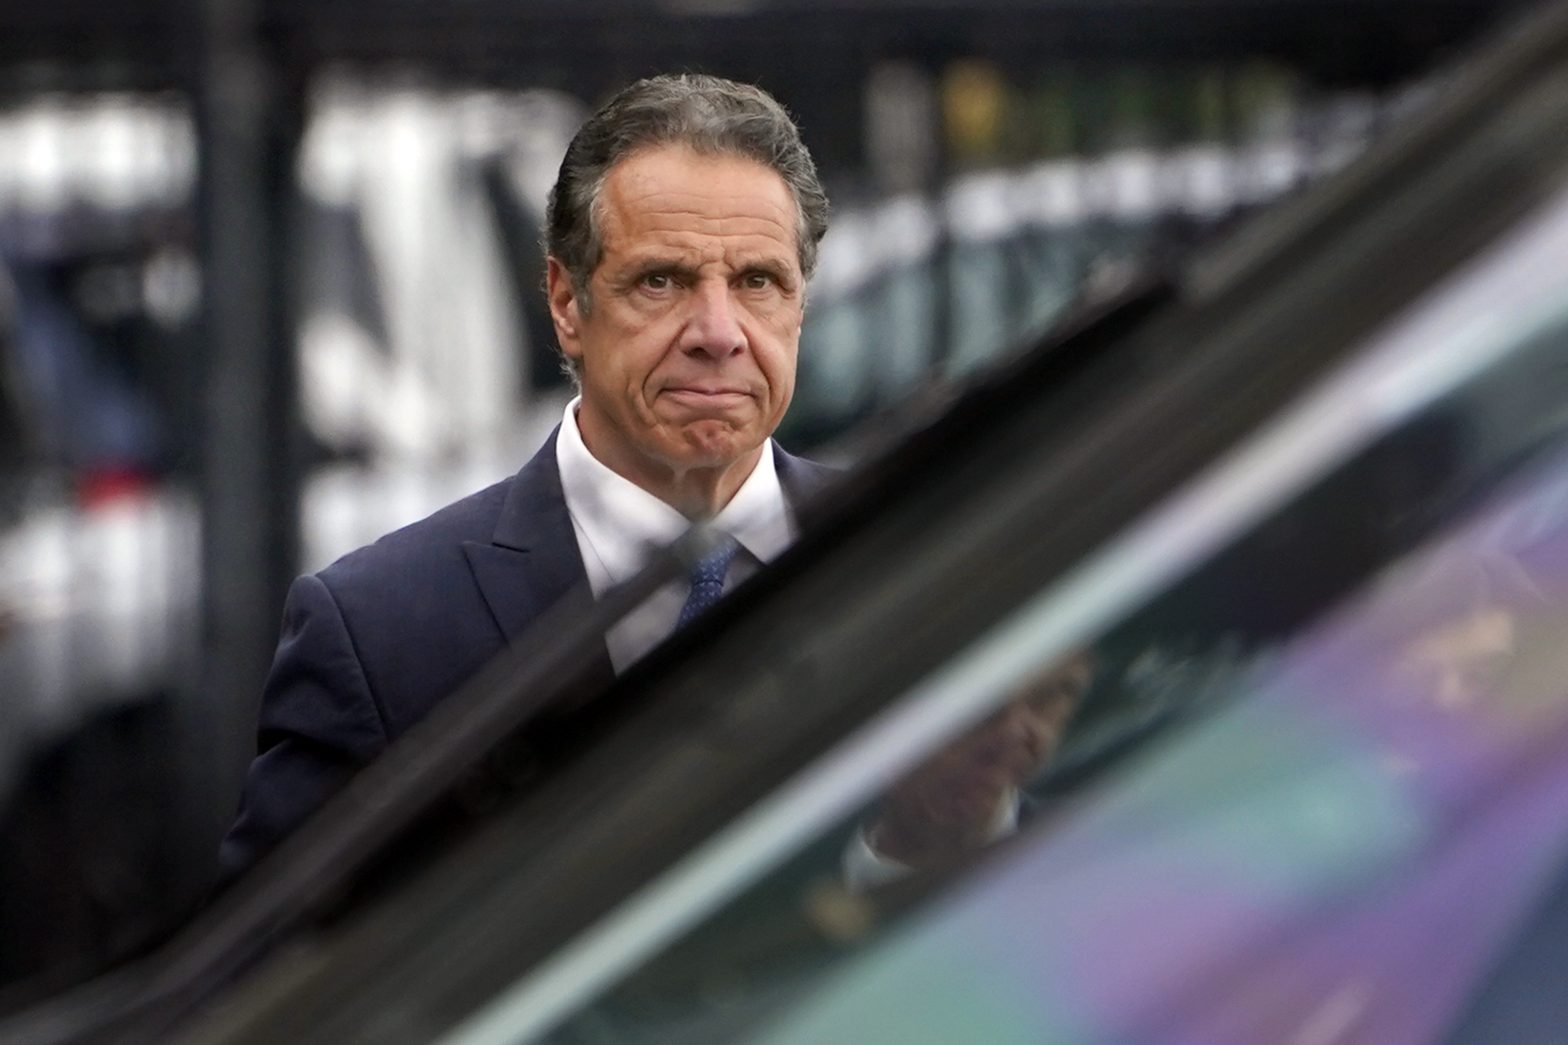 DA: No Charges for Cuomo From Allegations by 2 Women